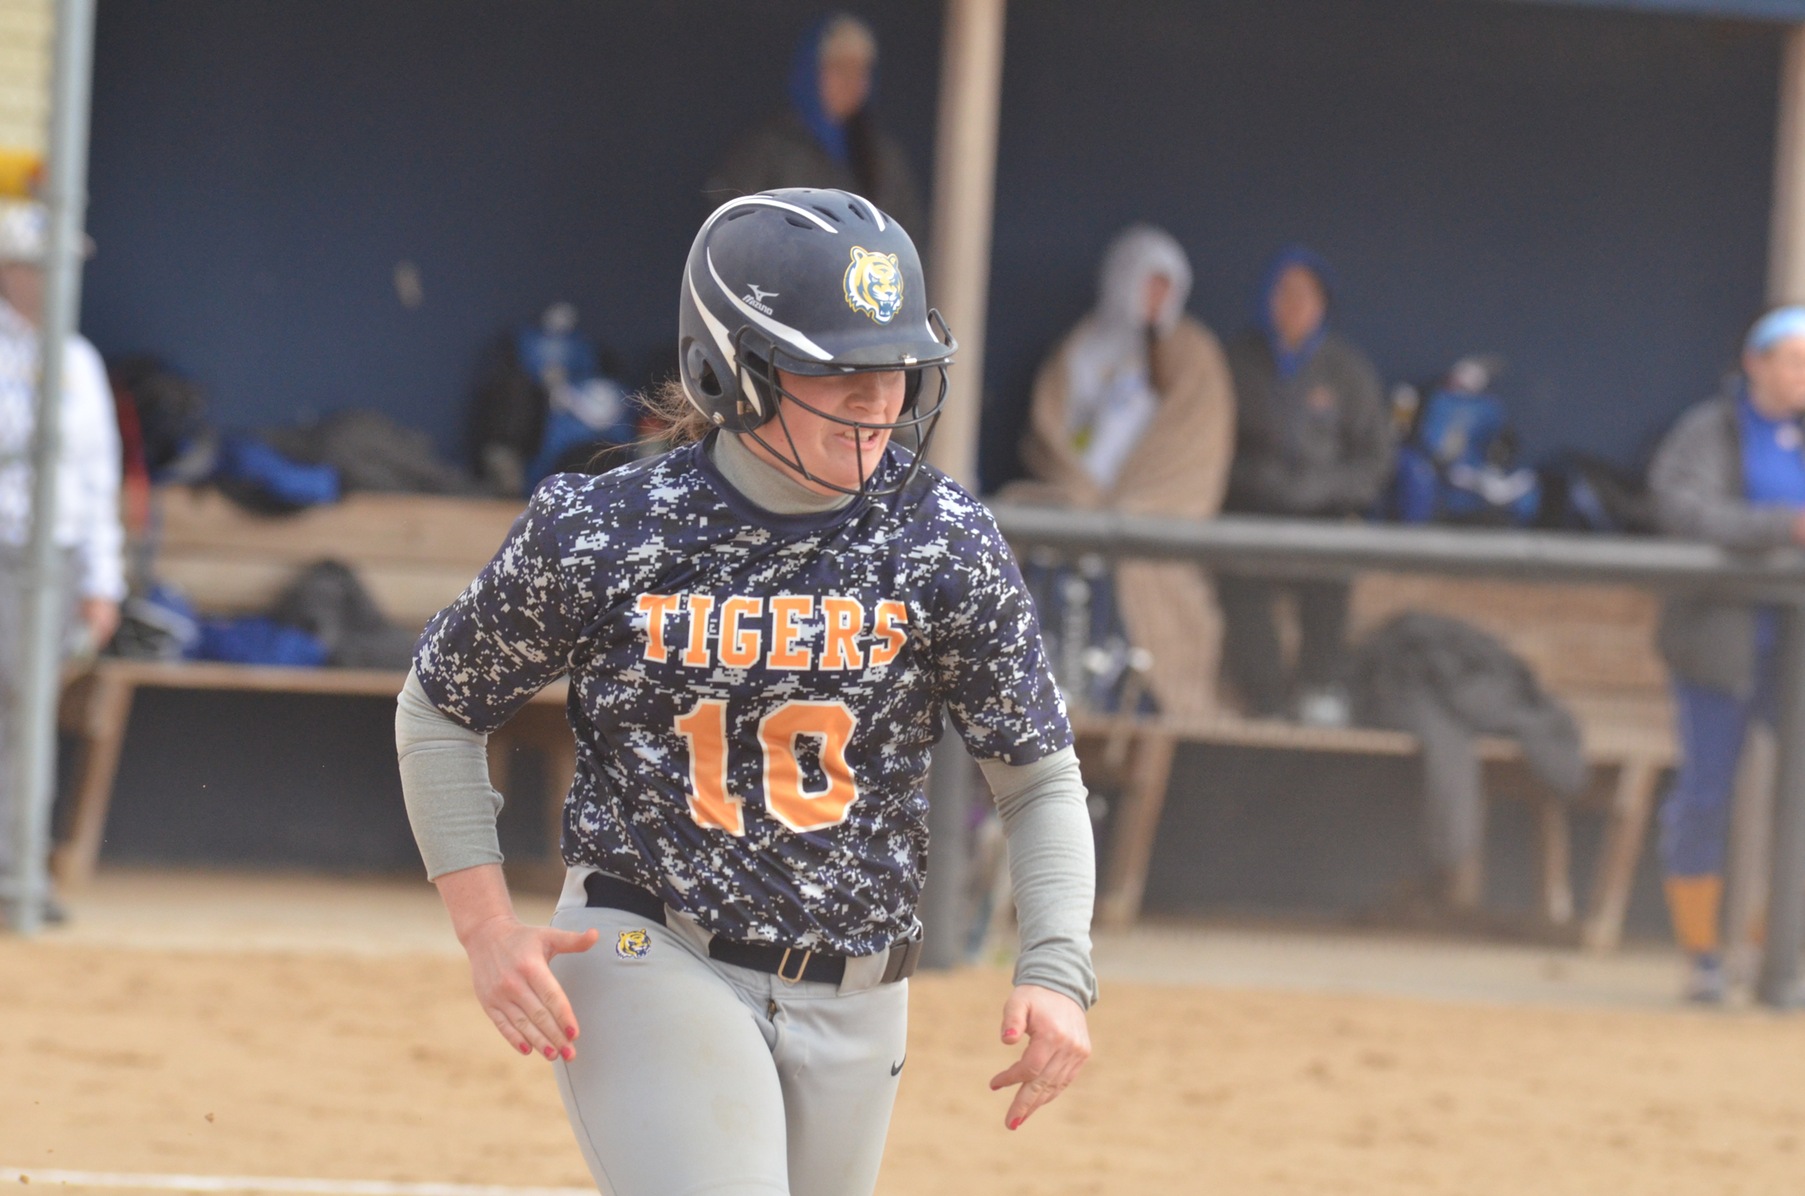 Courtney Fudge and the MCC softball team split Sunday's doubleheader with Grinnell College